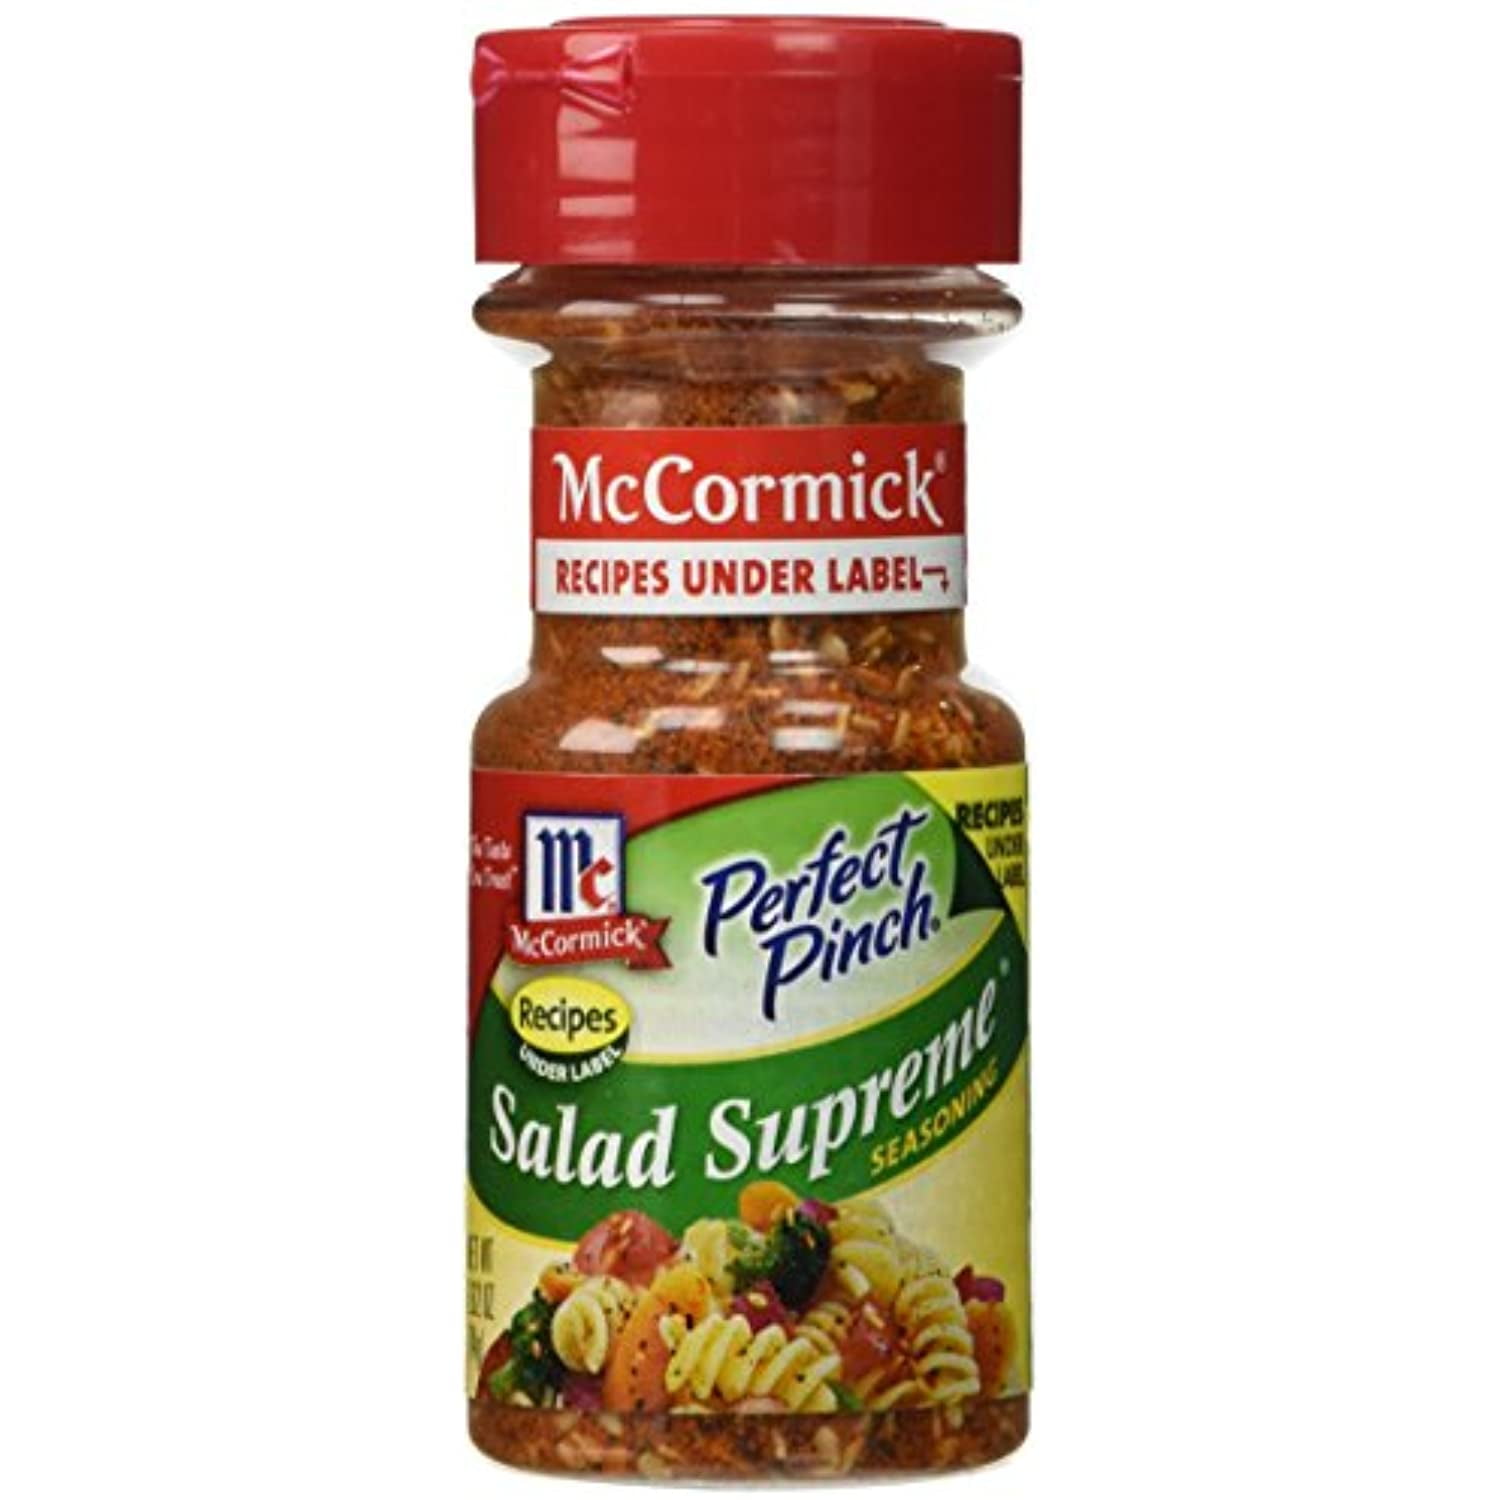 McCormick 6-Pack Perfect Pinch Salad Supreme Seasoning as low as $8.09  Shipped Free (Reg. $17.66) - $1.35/Bottle - Fabulessly Frugal